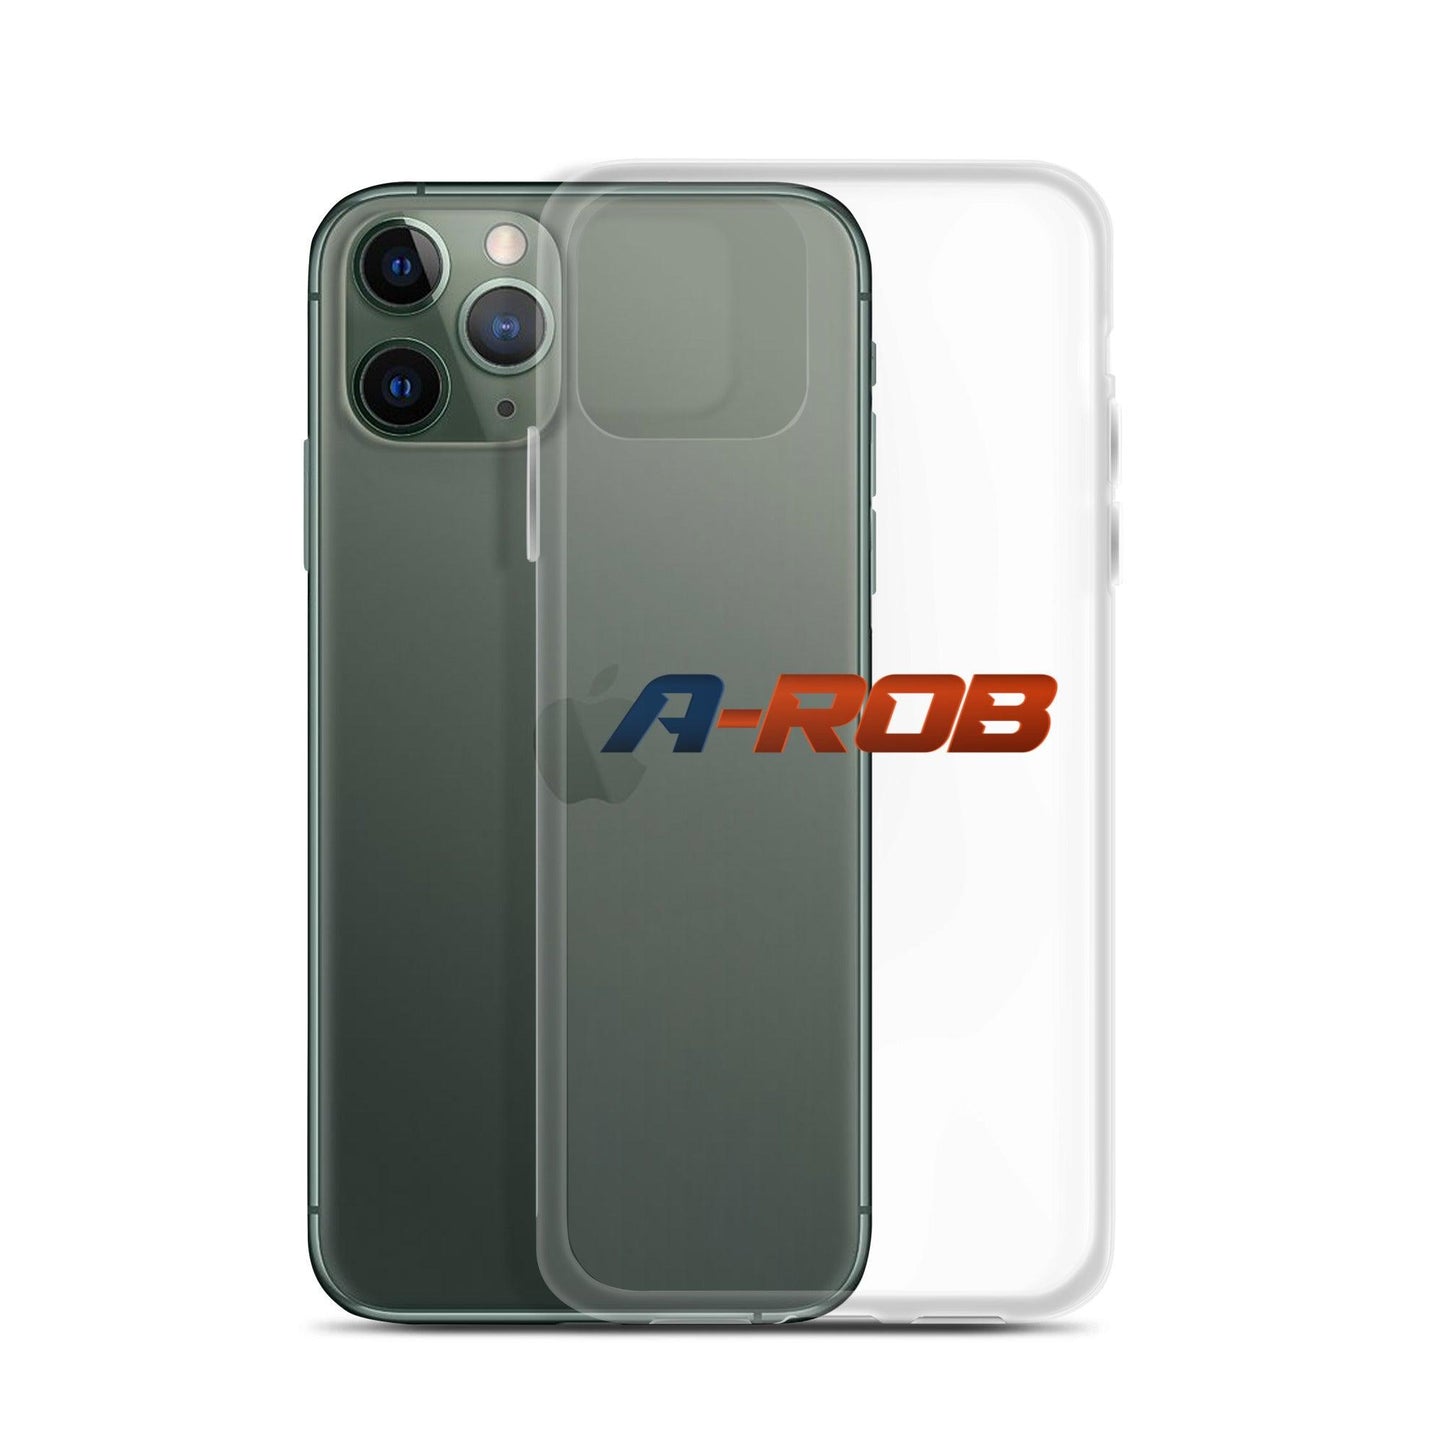 Anthony Robinson "A-ROB" iPhone Case - Fan Arch